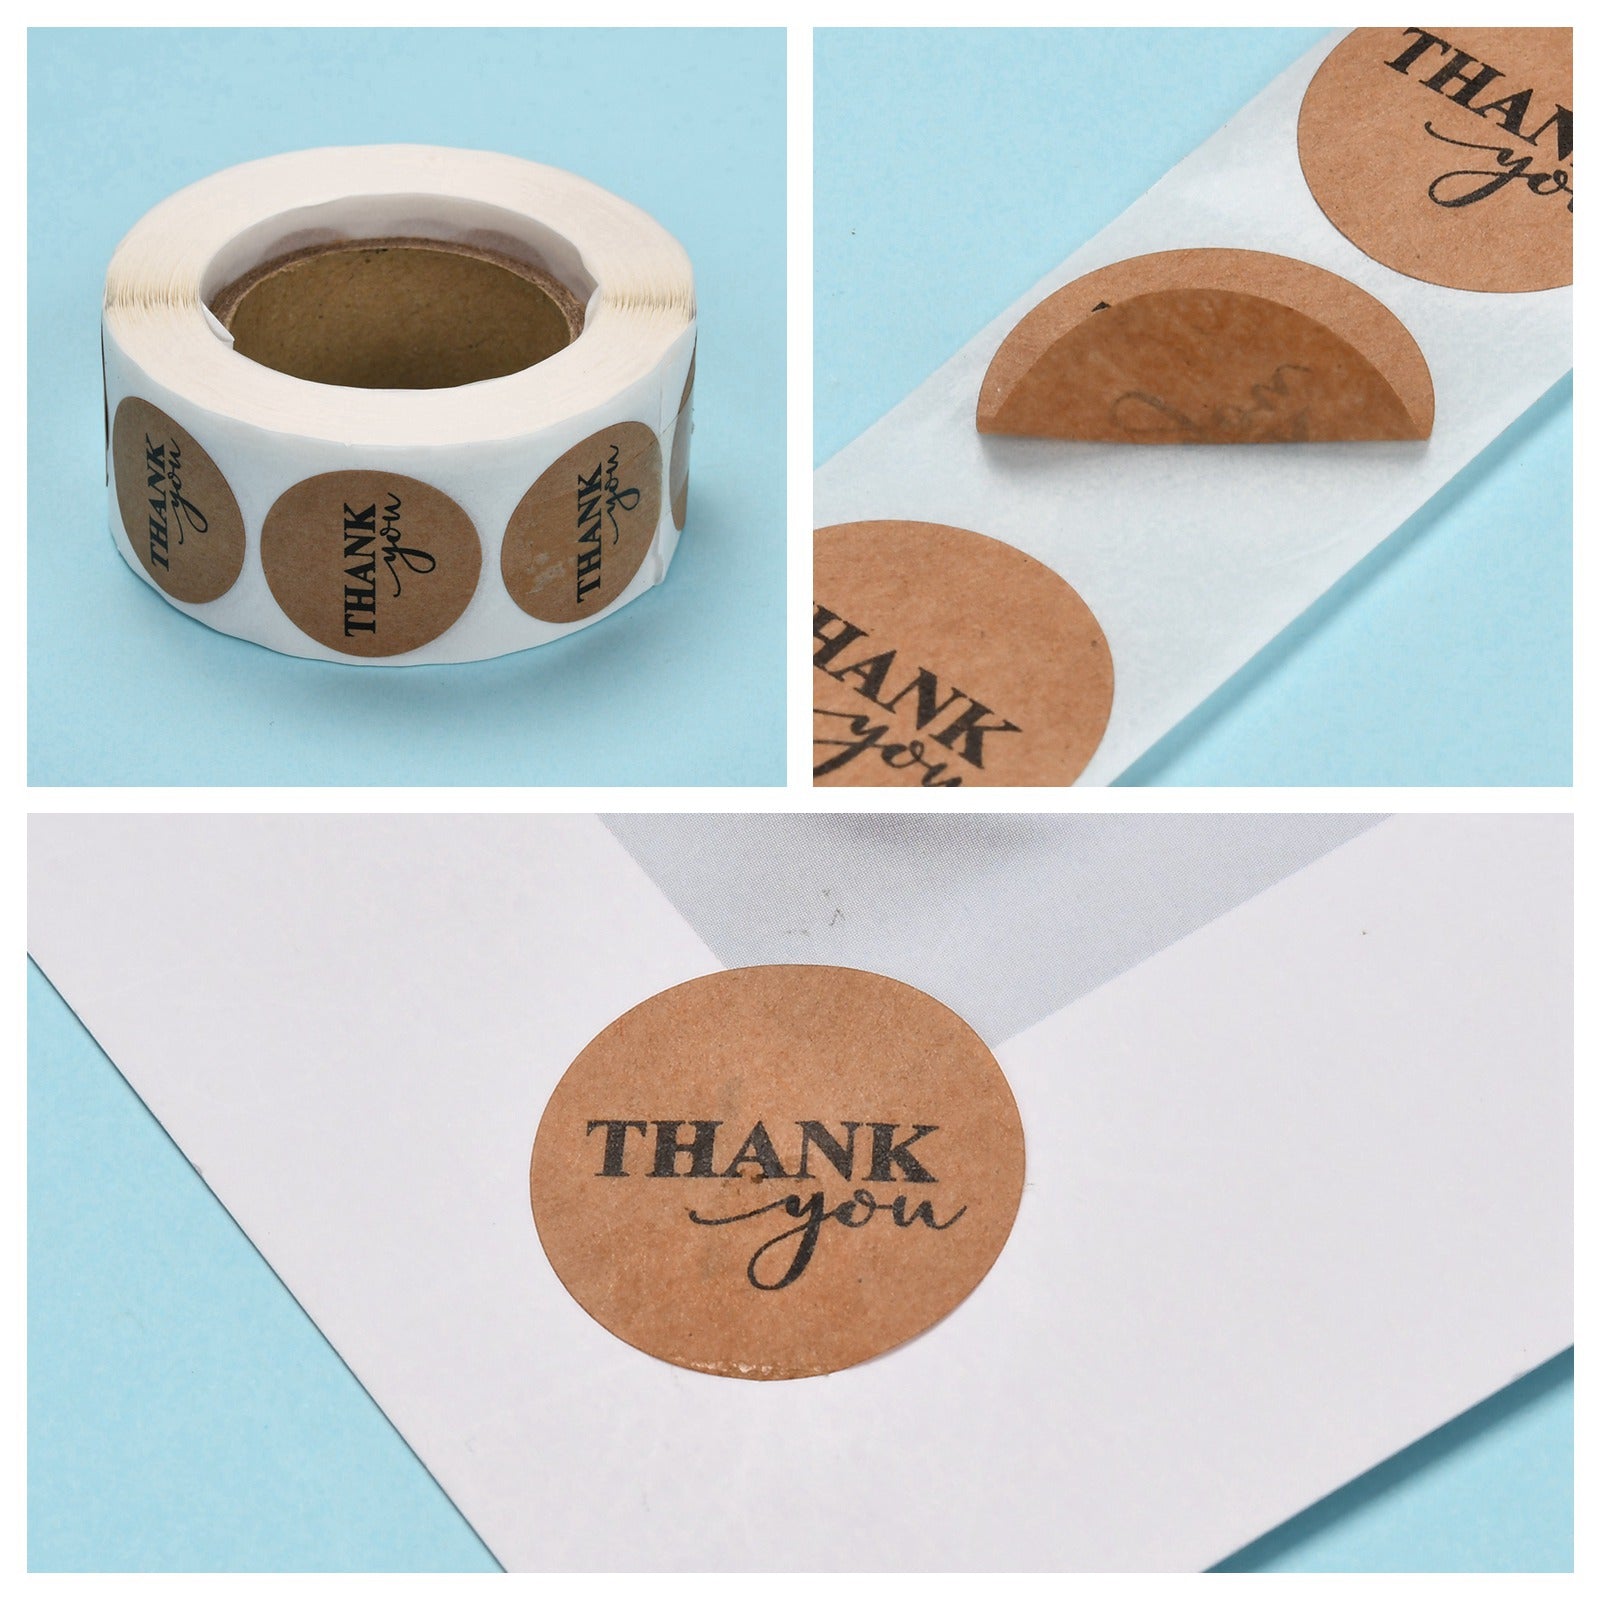 Globleland 1 Inch Thank You Stickers, DIY Scrapbook, Decorative Adhesive Tapes, Flat Round with Word Thank You, BurlyWood, 25mm, about 500pcs/roll